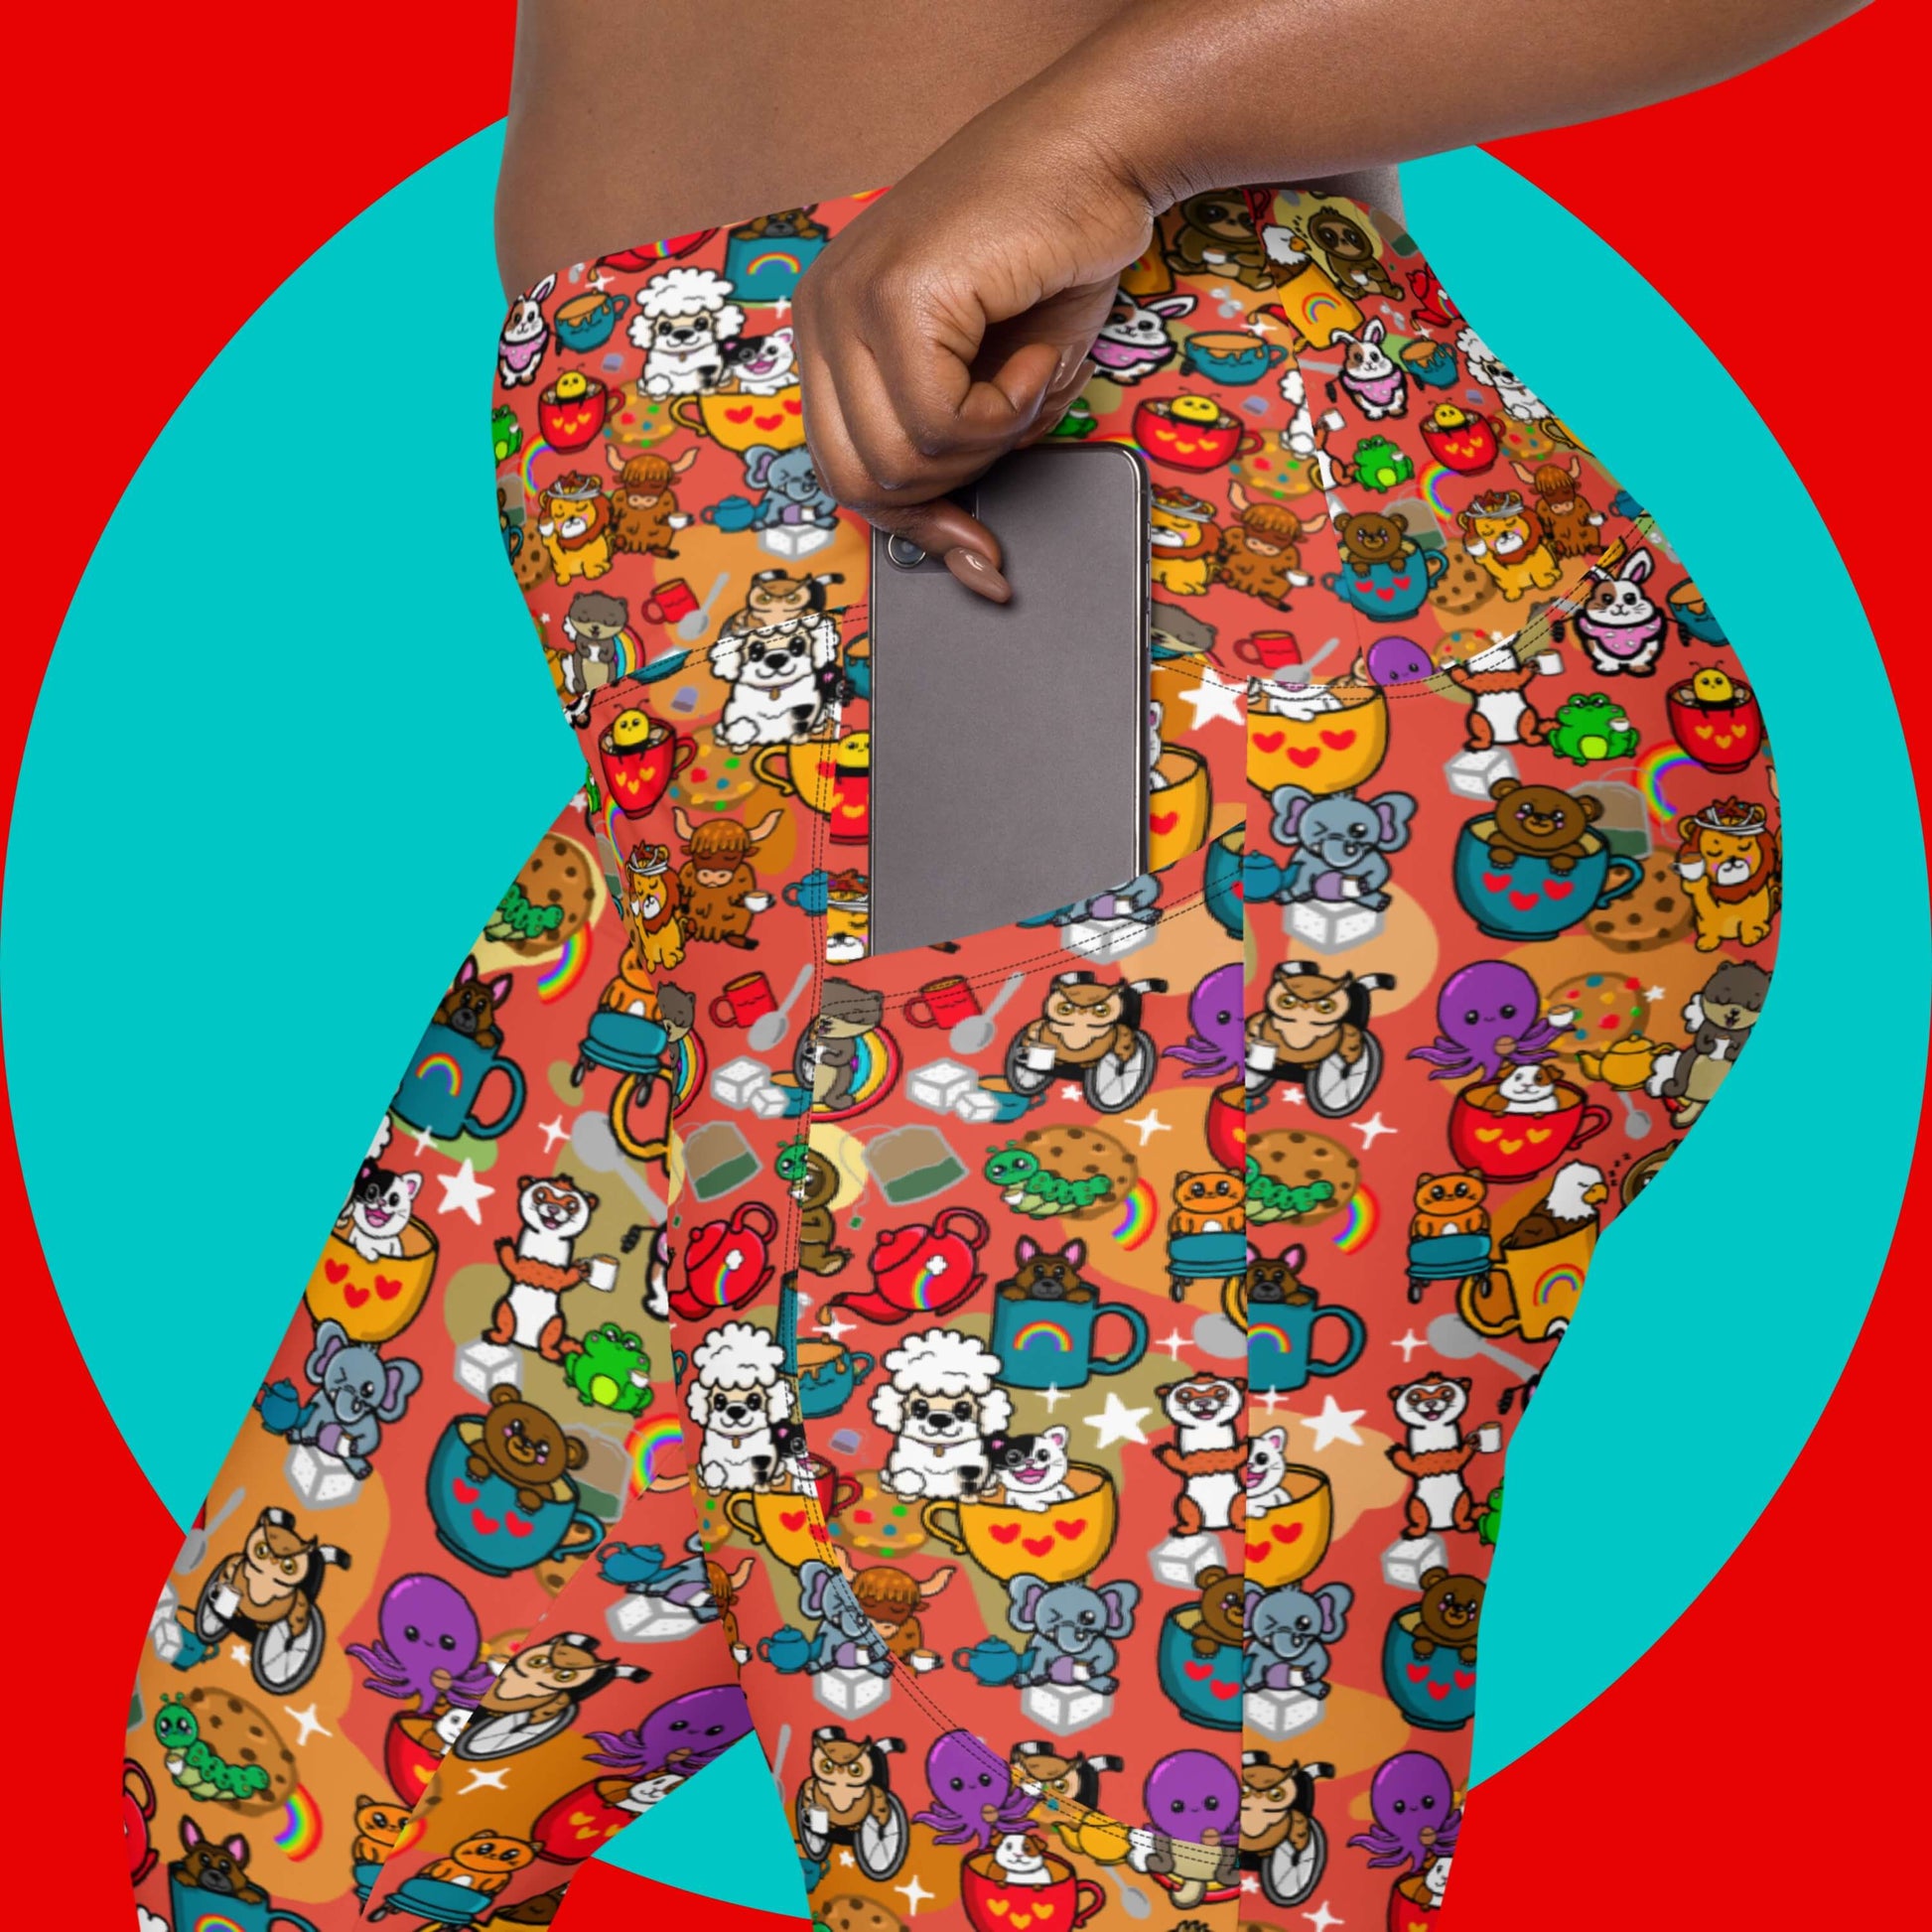 Close up of the Disabili Tea and Biscuits - Disability Leggings with pockets being modelled by a femme person tucking a silver phone into the side pocket on a red and blue background. The leggings feature various disabled and chronically ill animal characters drinking tea, sitting in tea mugs and holding up mugs. There is also various cookie biscuits, tea bags, sugar cubes, teapots, rainbows, sparkles and tea spills all underneath. The leggings are a punny gift raising awareness for disabilities.